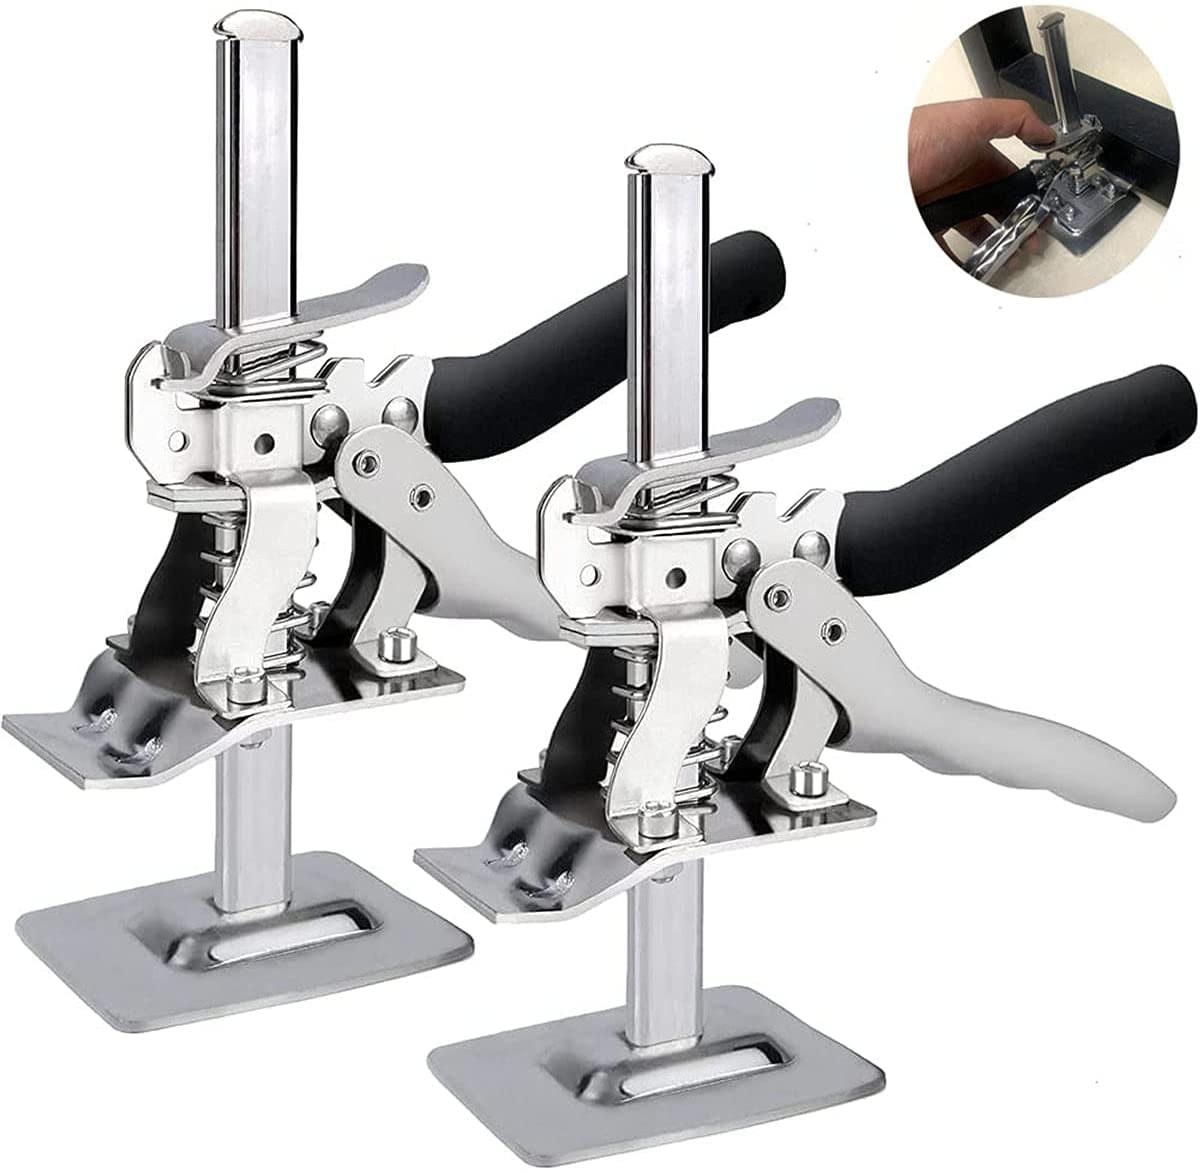 Houseables Hand Lifting Jack Tool Furniture Lifter Tool Labor Saving Arm  Jack Furniture Jack Lifter Cabinet Jacks for Installing Cabinets Lift Jack  Drywall Lifts Appliance Jack Hand Jack 2 Pk Auction